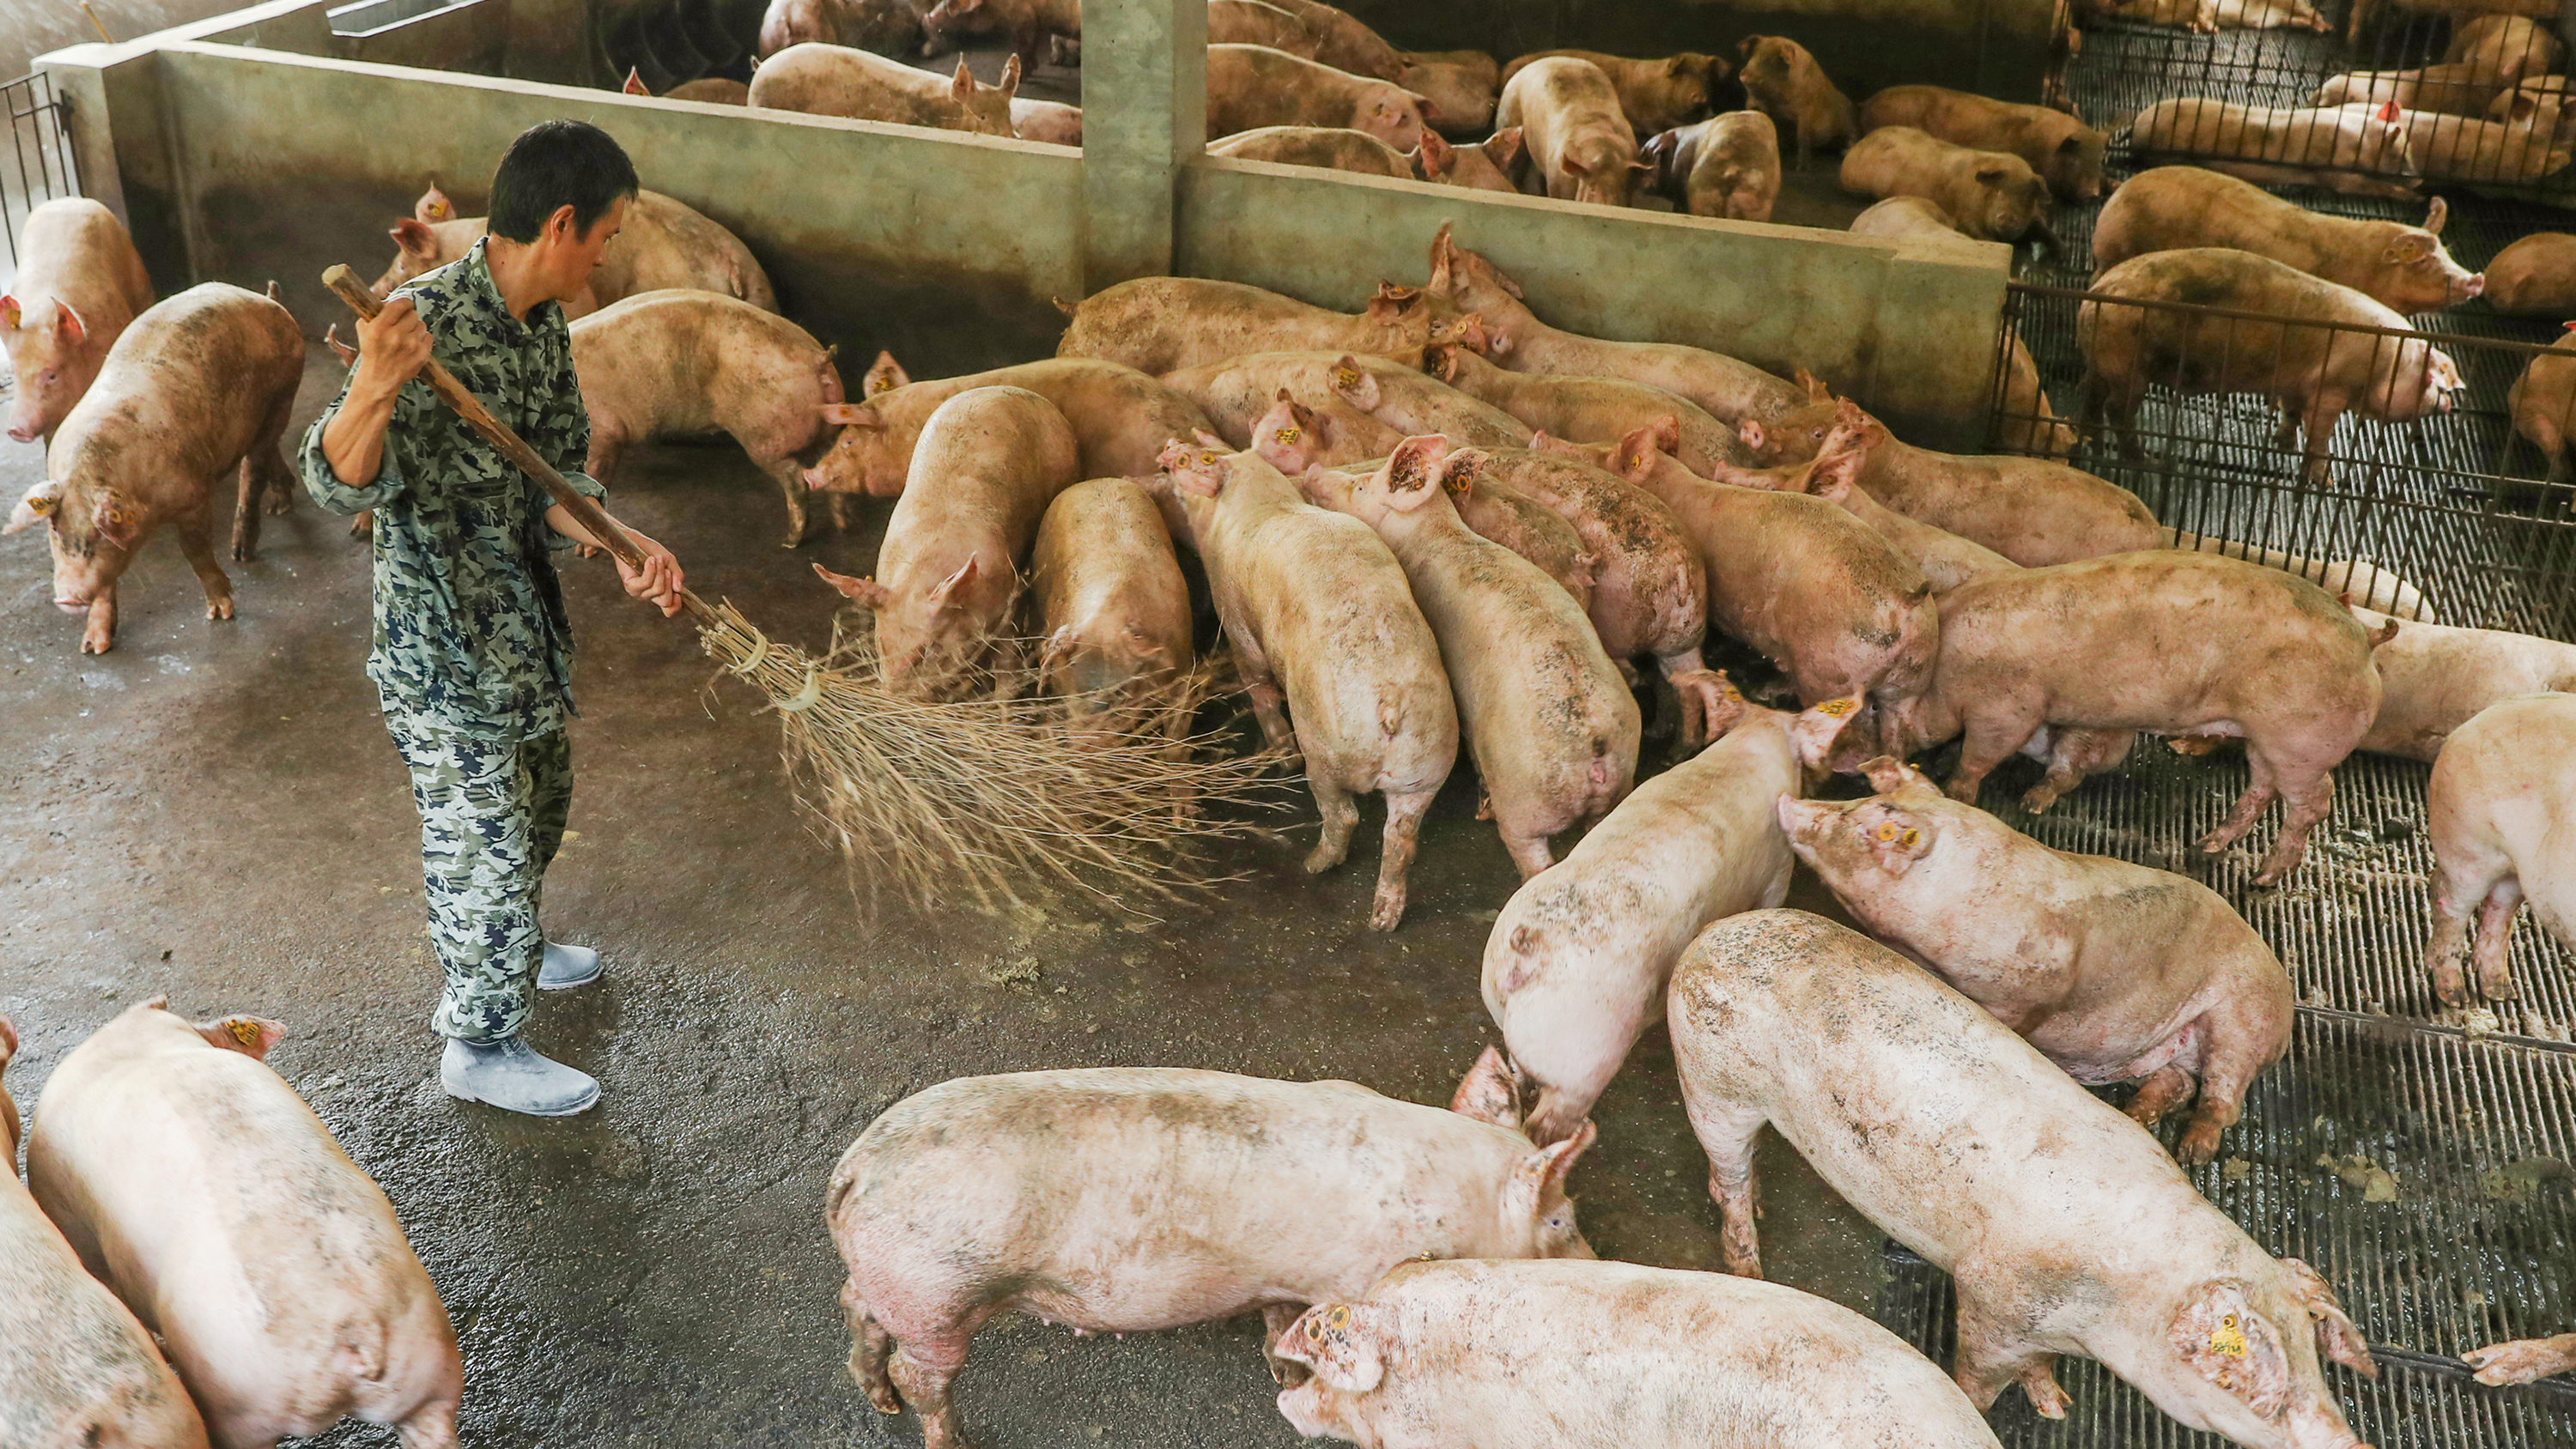 GUANG AN, CHINA - AUGUST 27: A worker cleans up a pigsty at a pig farm on August 9, 2019 in Guang an, Sichuan Province of China. China's consumer price index (CPI) rose 2.8 percent year-on-year in July, according to the data released by National Bureau of Statistics (NBS) on Friday. (Photo by Qiu Haiying/VCG via Getty Images)